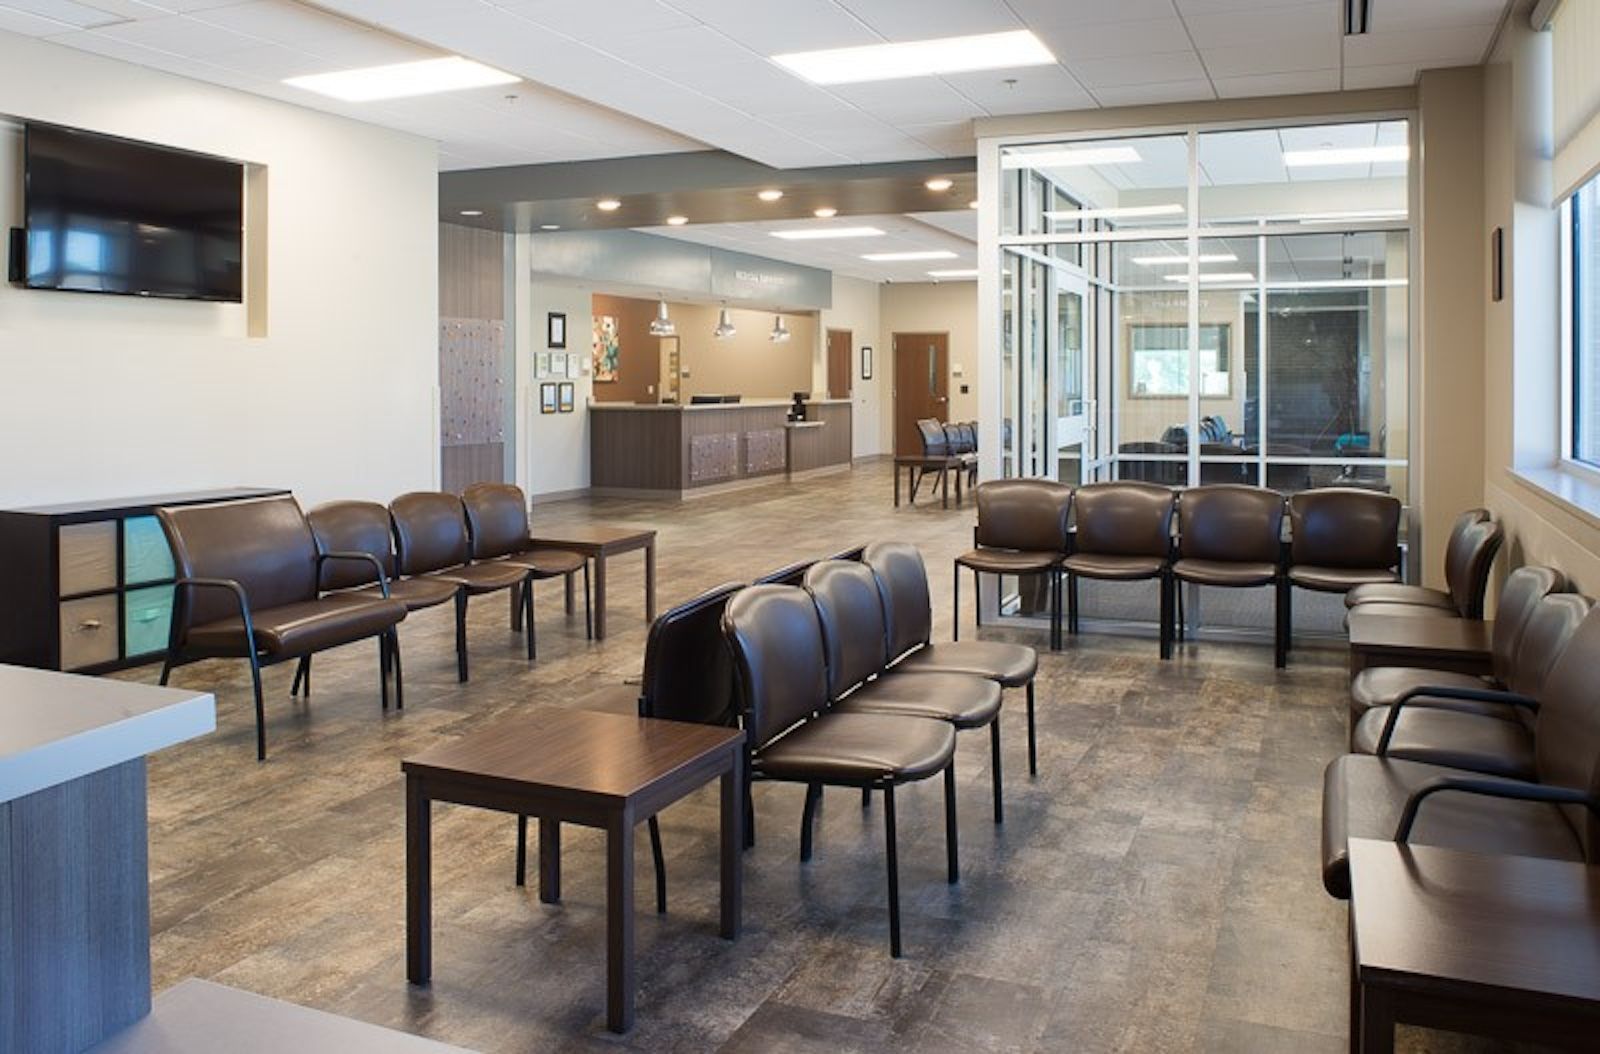 Professional Contractors & Engineers Builds Beautiful Commercial Spaces With Modern Trends.